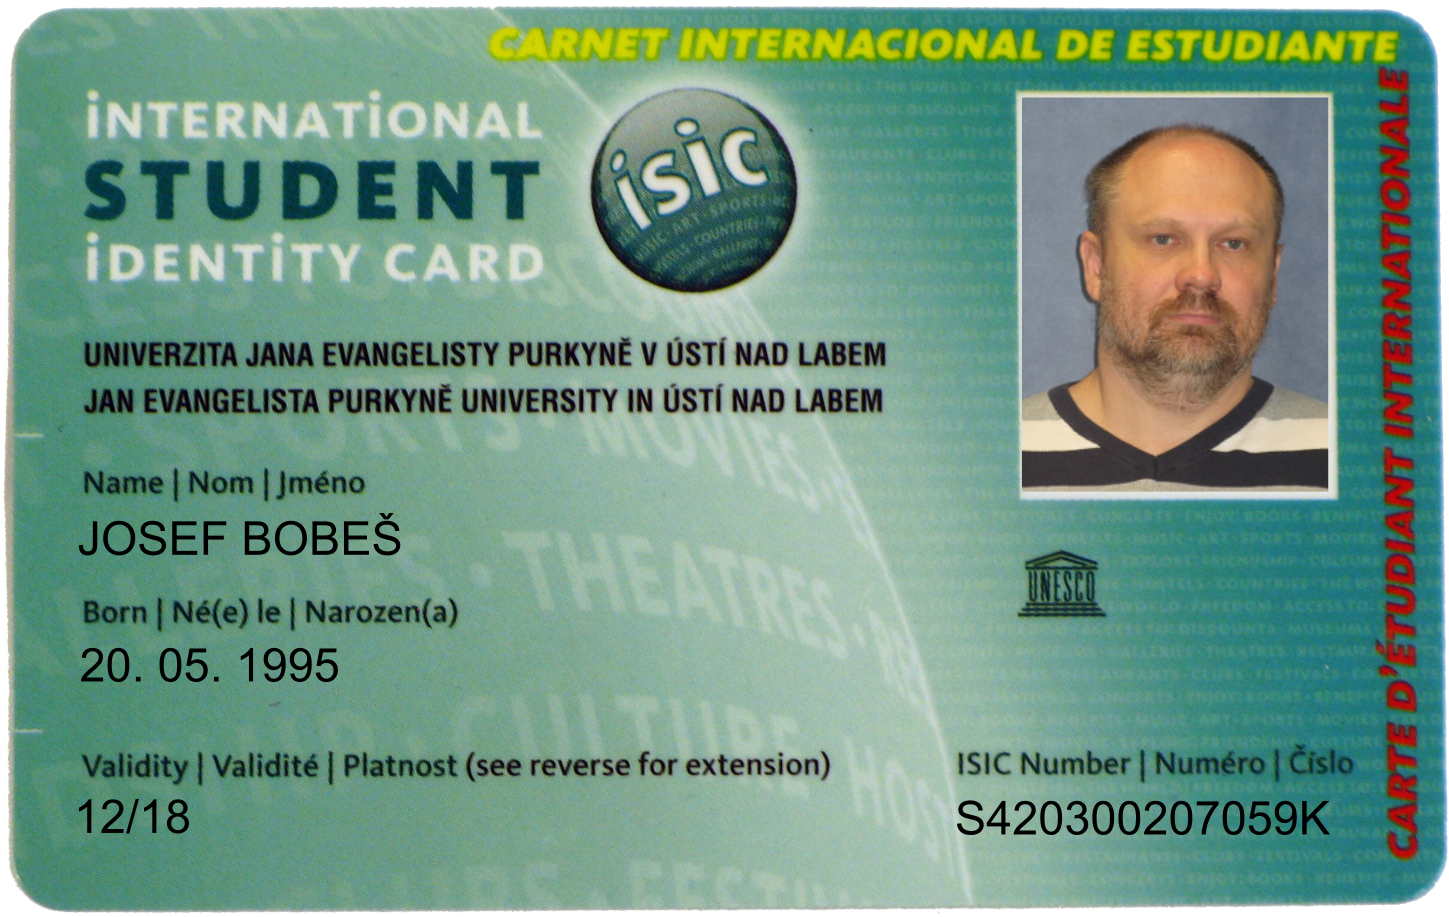 Student card with ISIC license - university student card + international student card